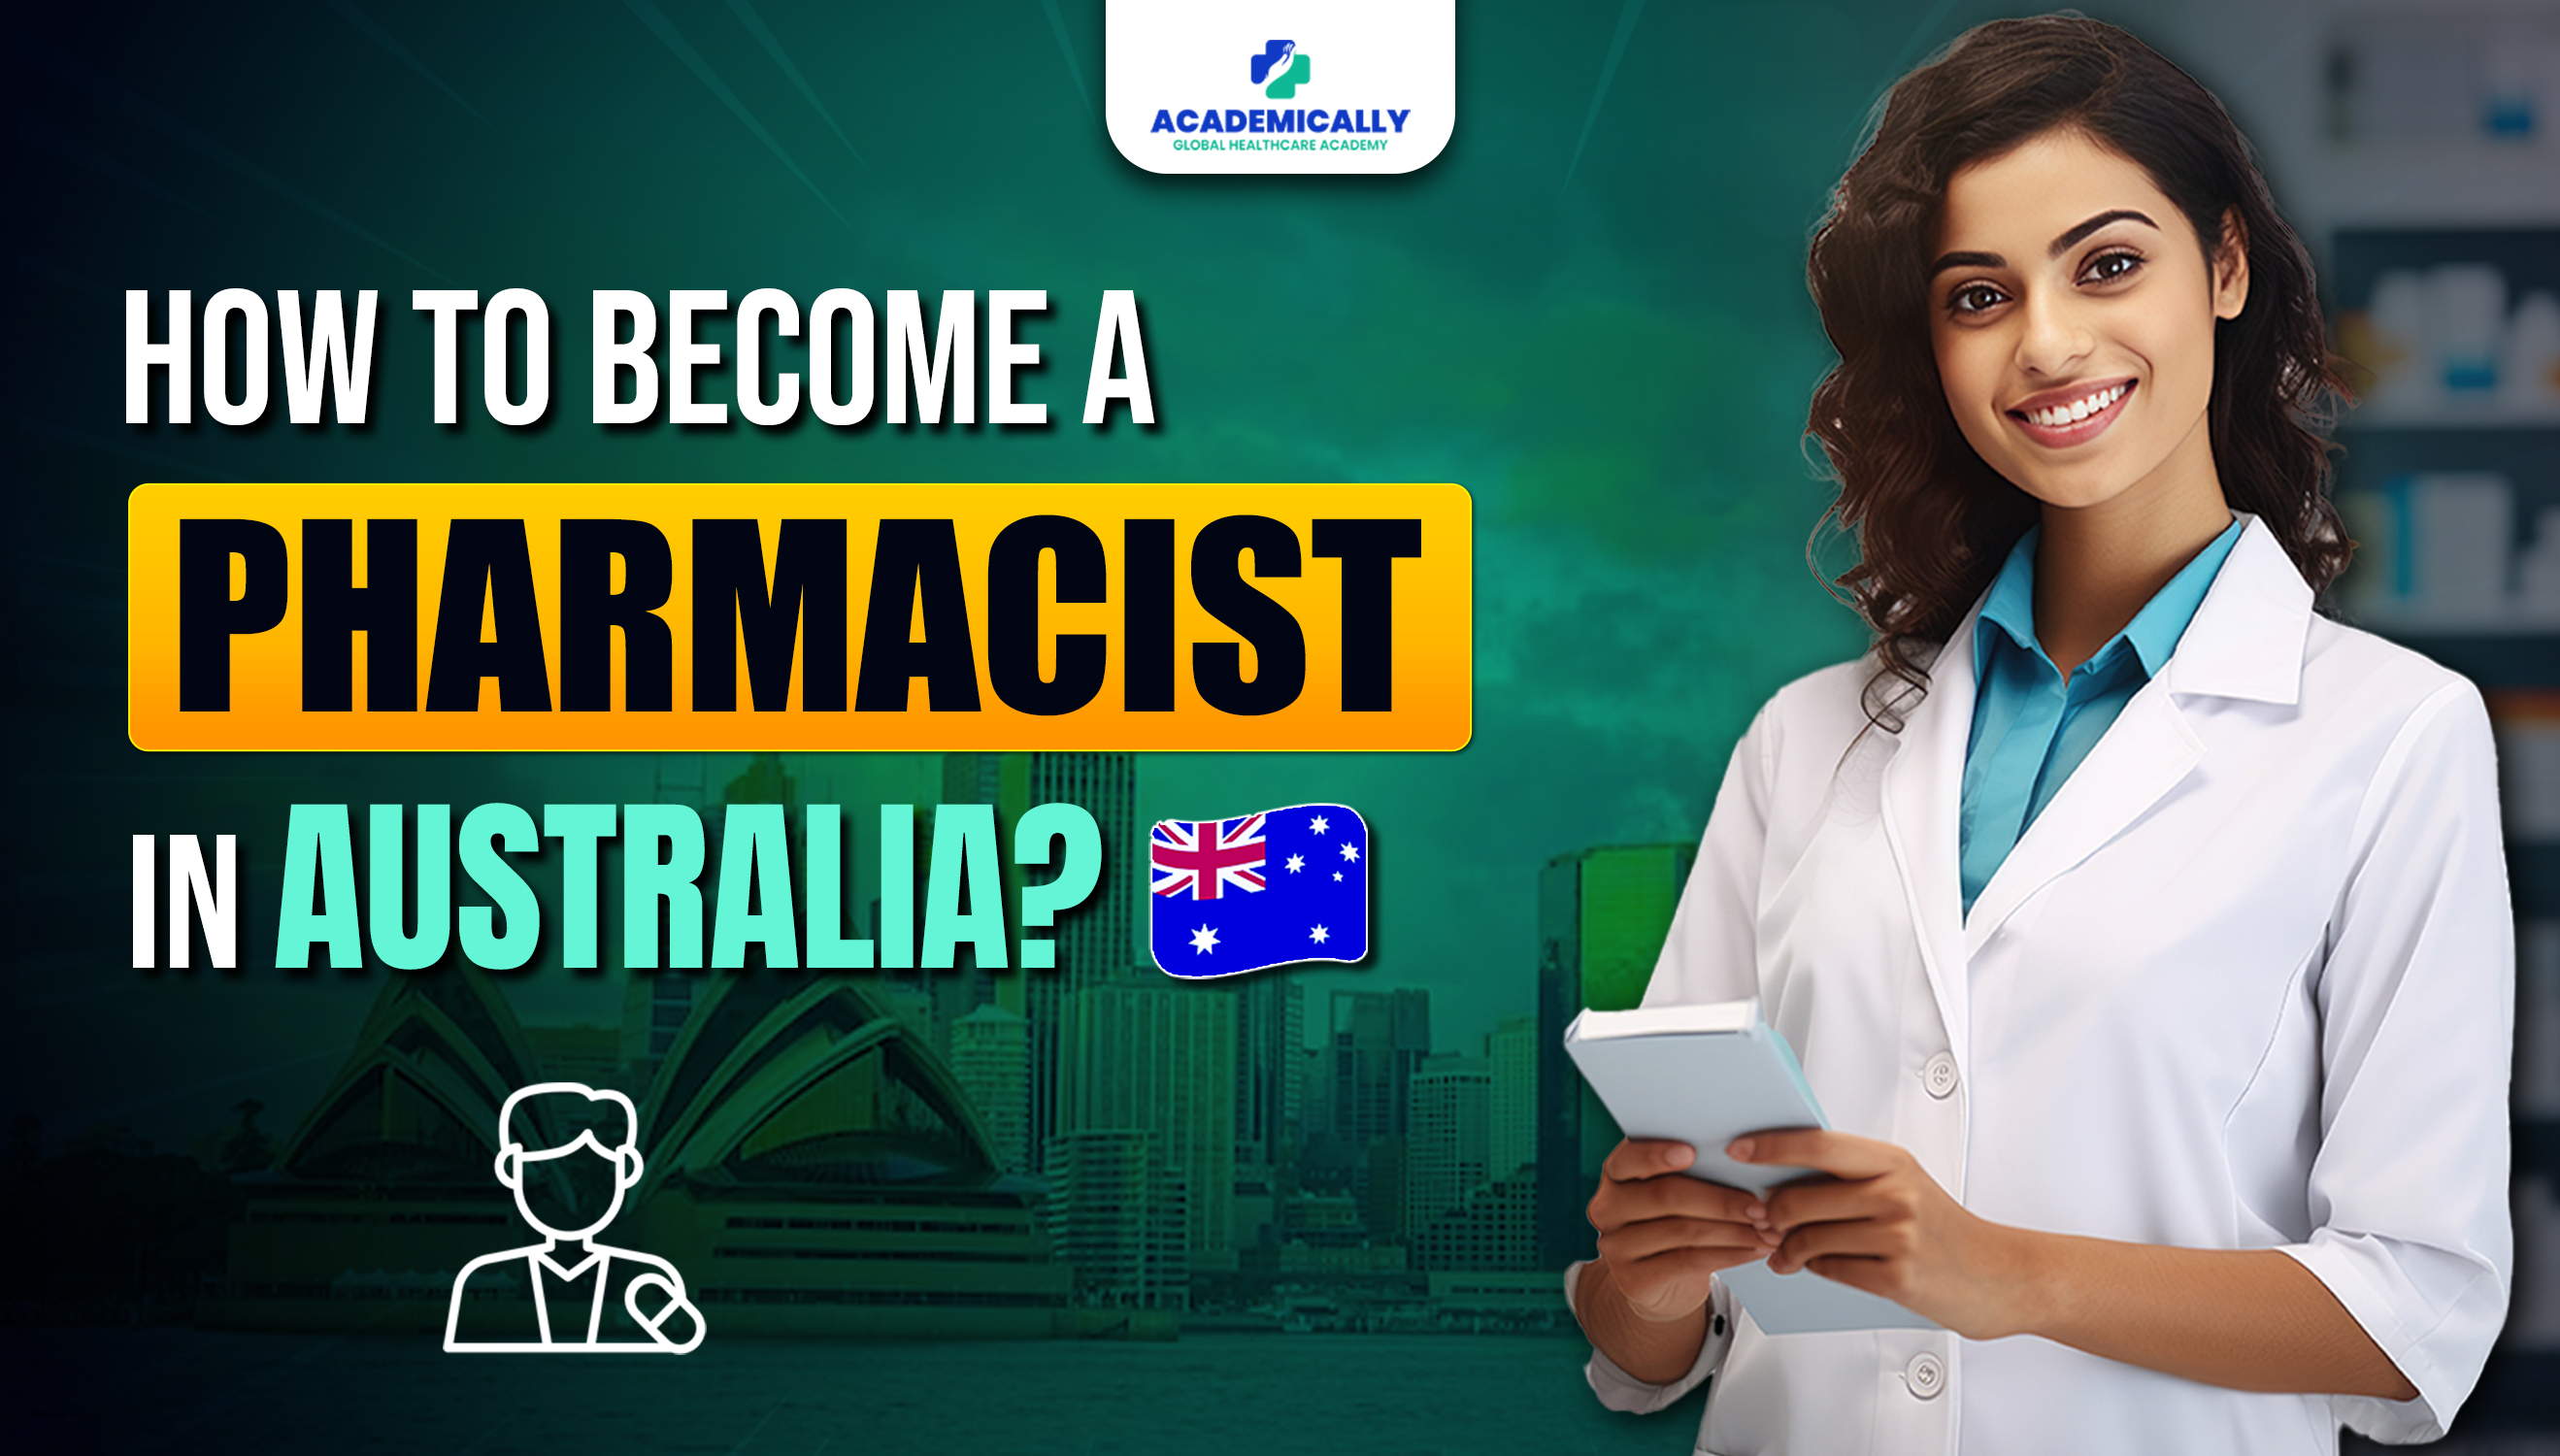 Become a Pharmacist in Australia | Academically